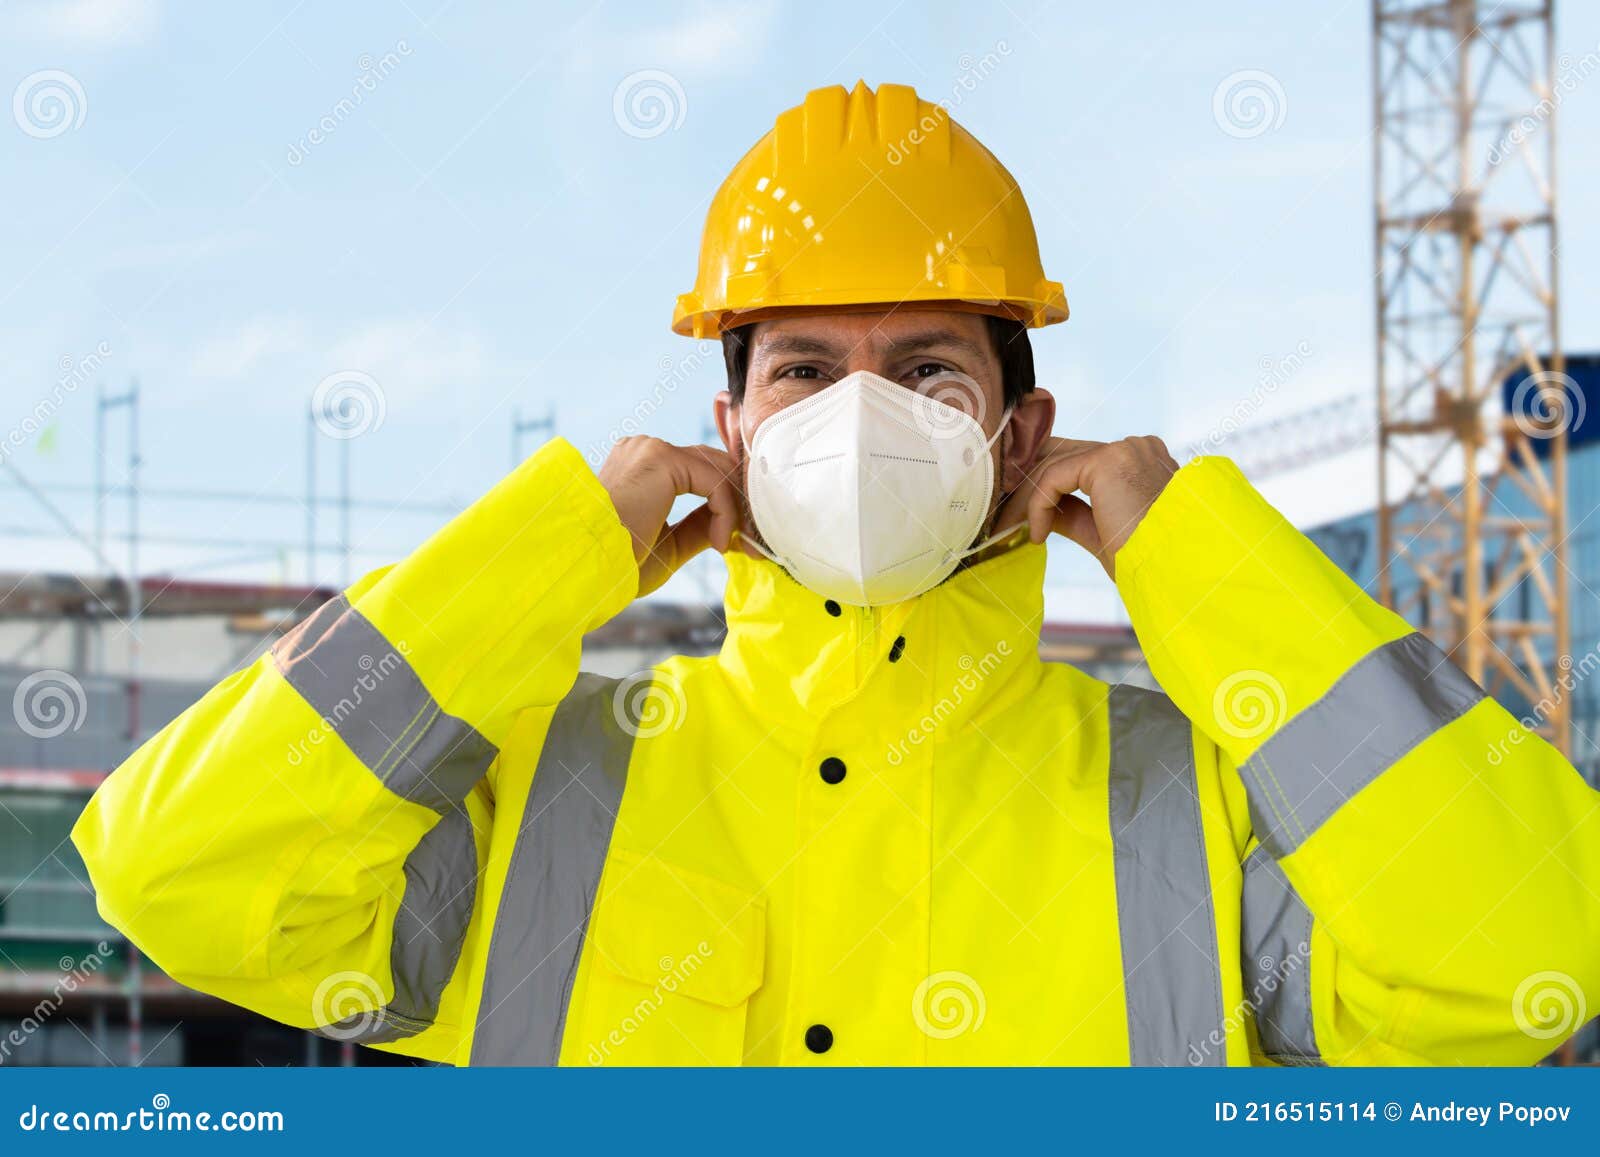 construction engineer wearing ffp2 face mask